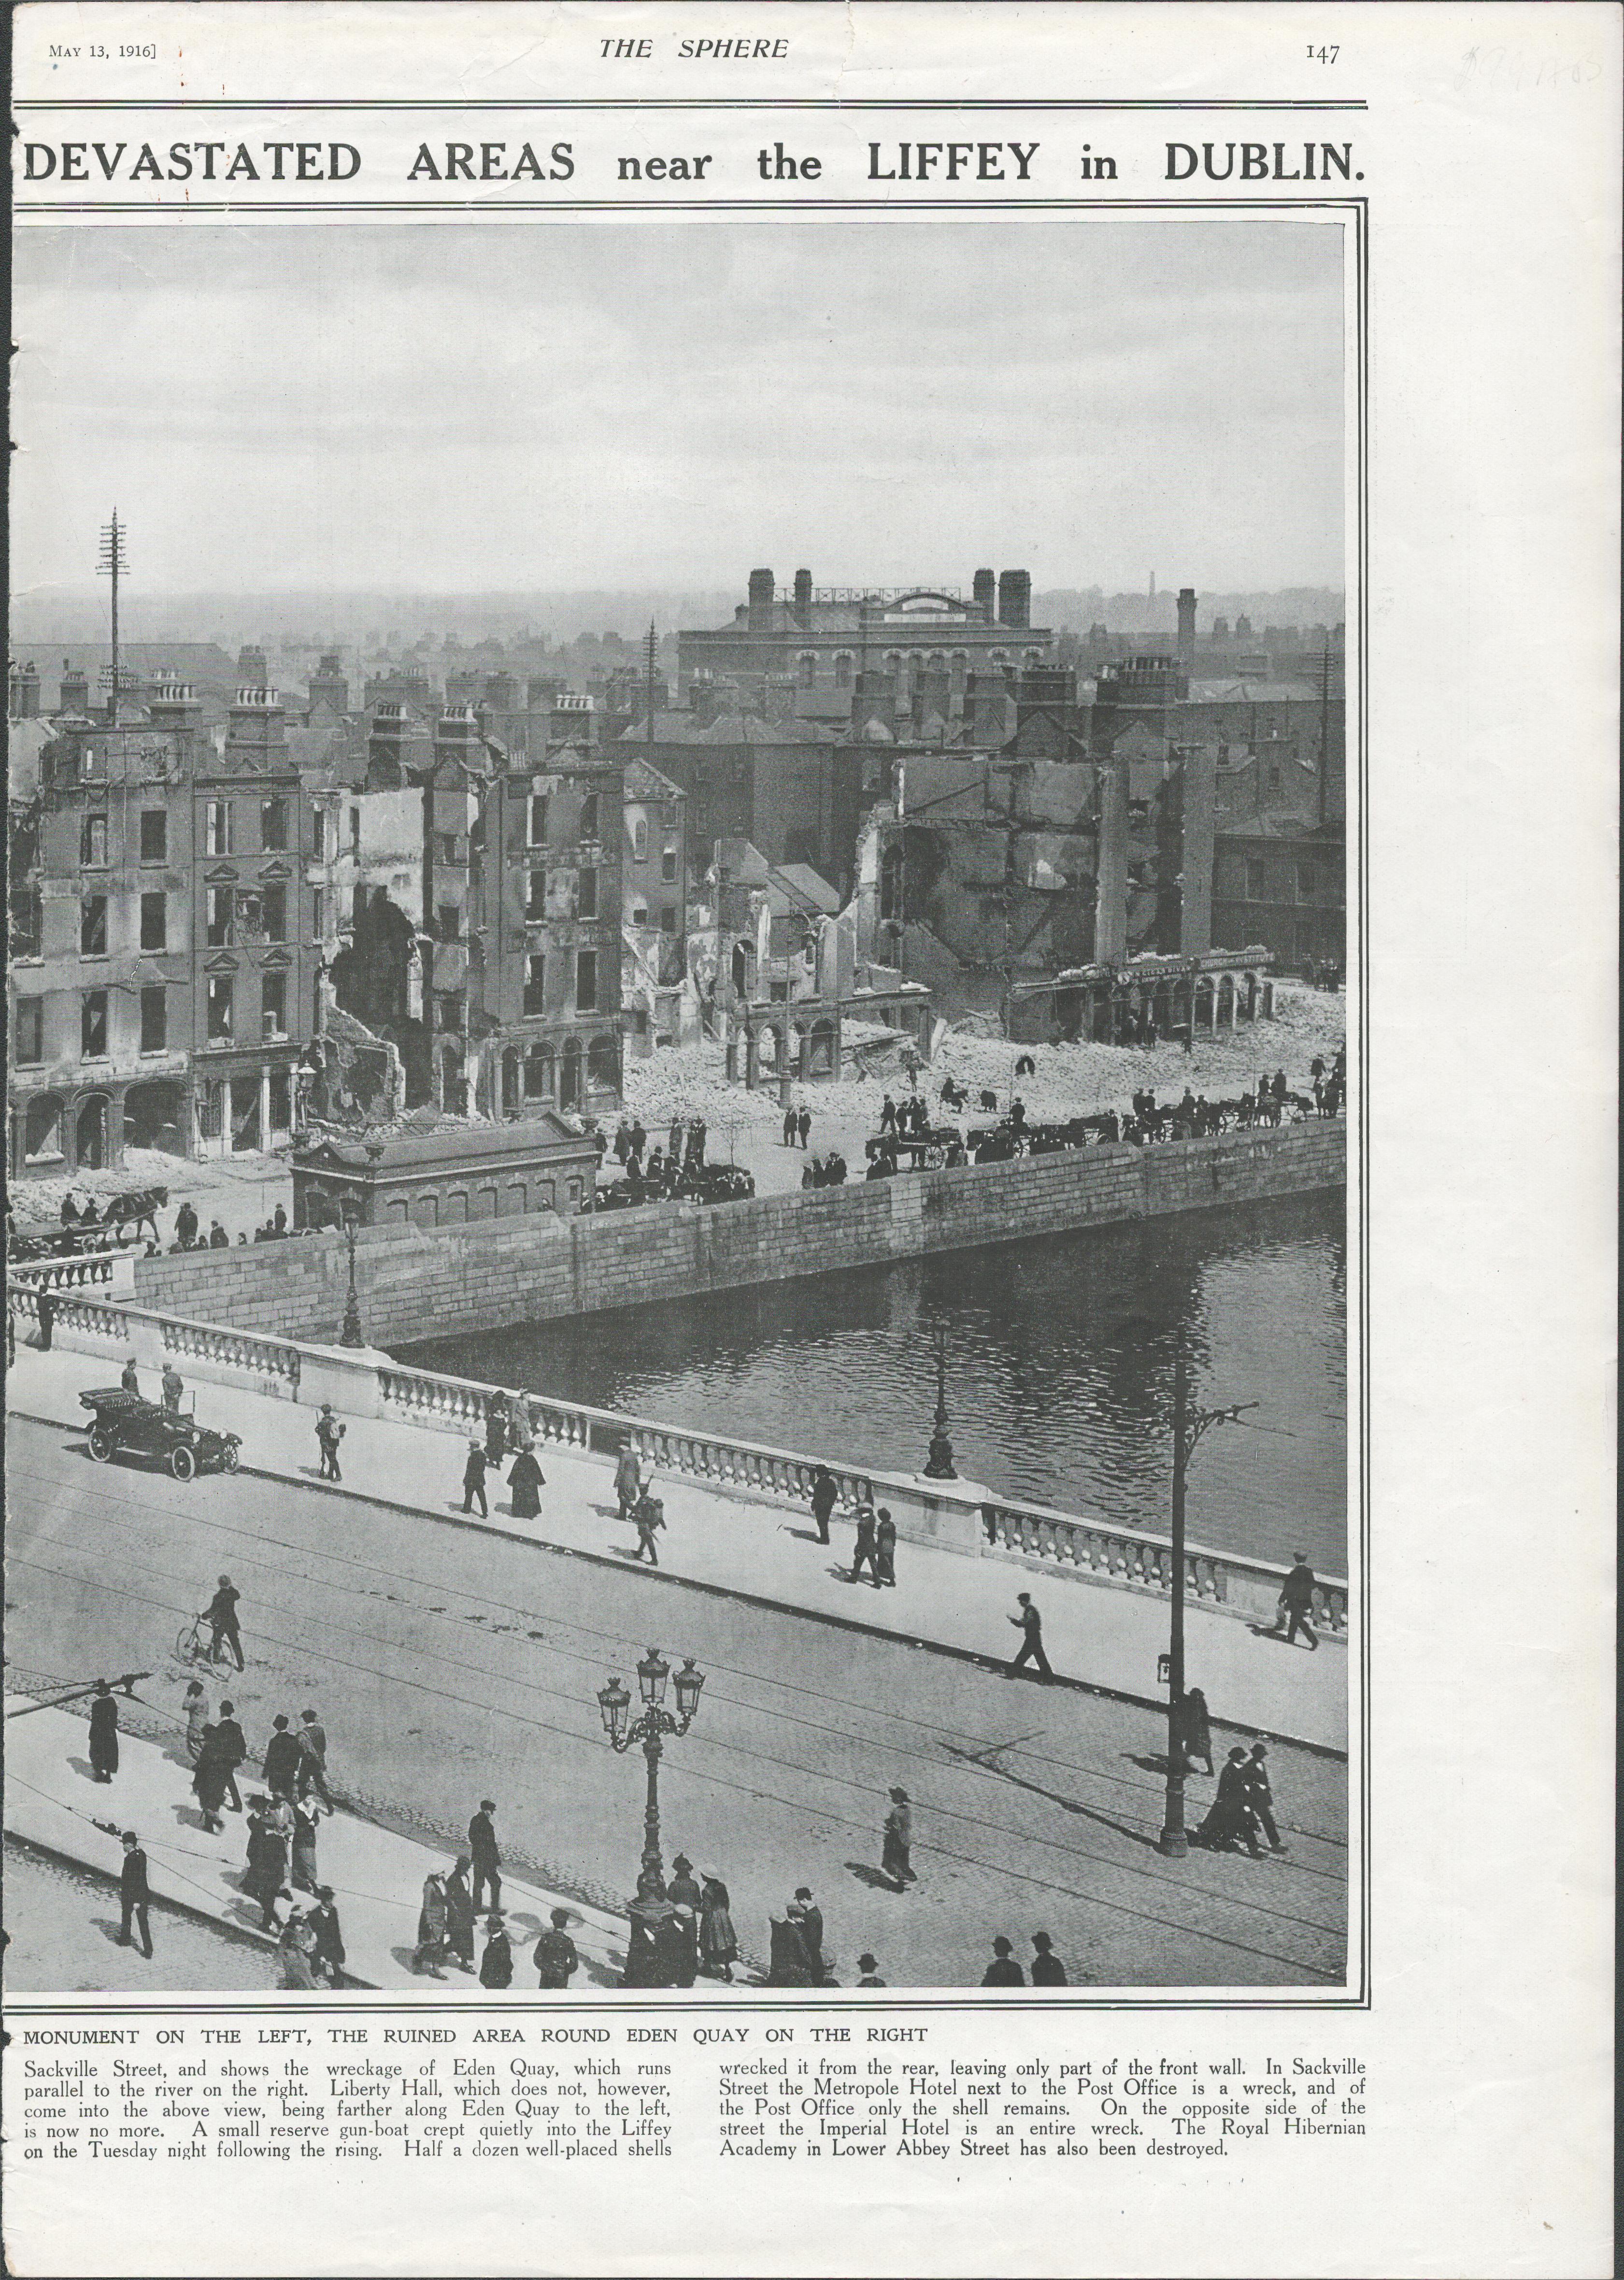 Double Centre Page The Sphere Newspaper The Aftermath of The Easter Rising - Image 3 of 3